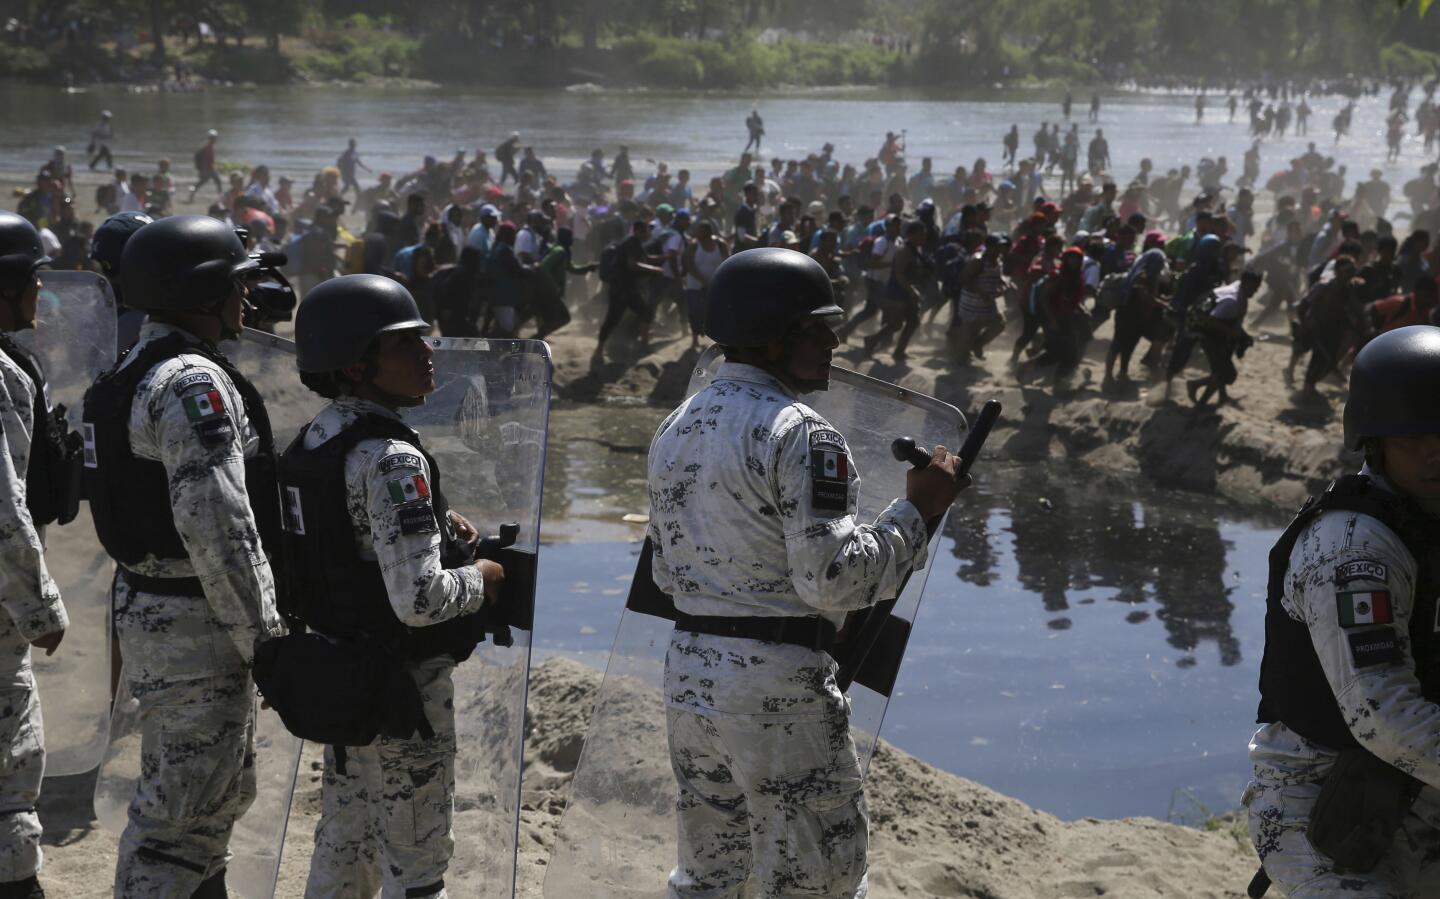 Mexican national guards stand on the bank of the Suchiate River where Central American migrants are crossing from Guatemala, near Ciudad Hidalgo, Mexico.